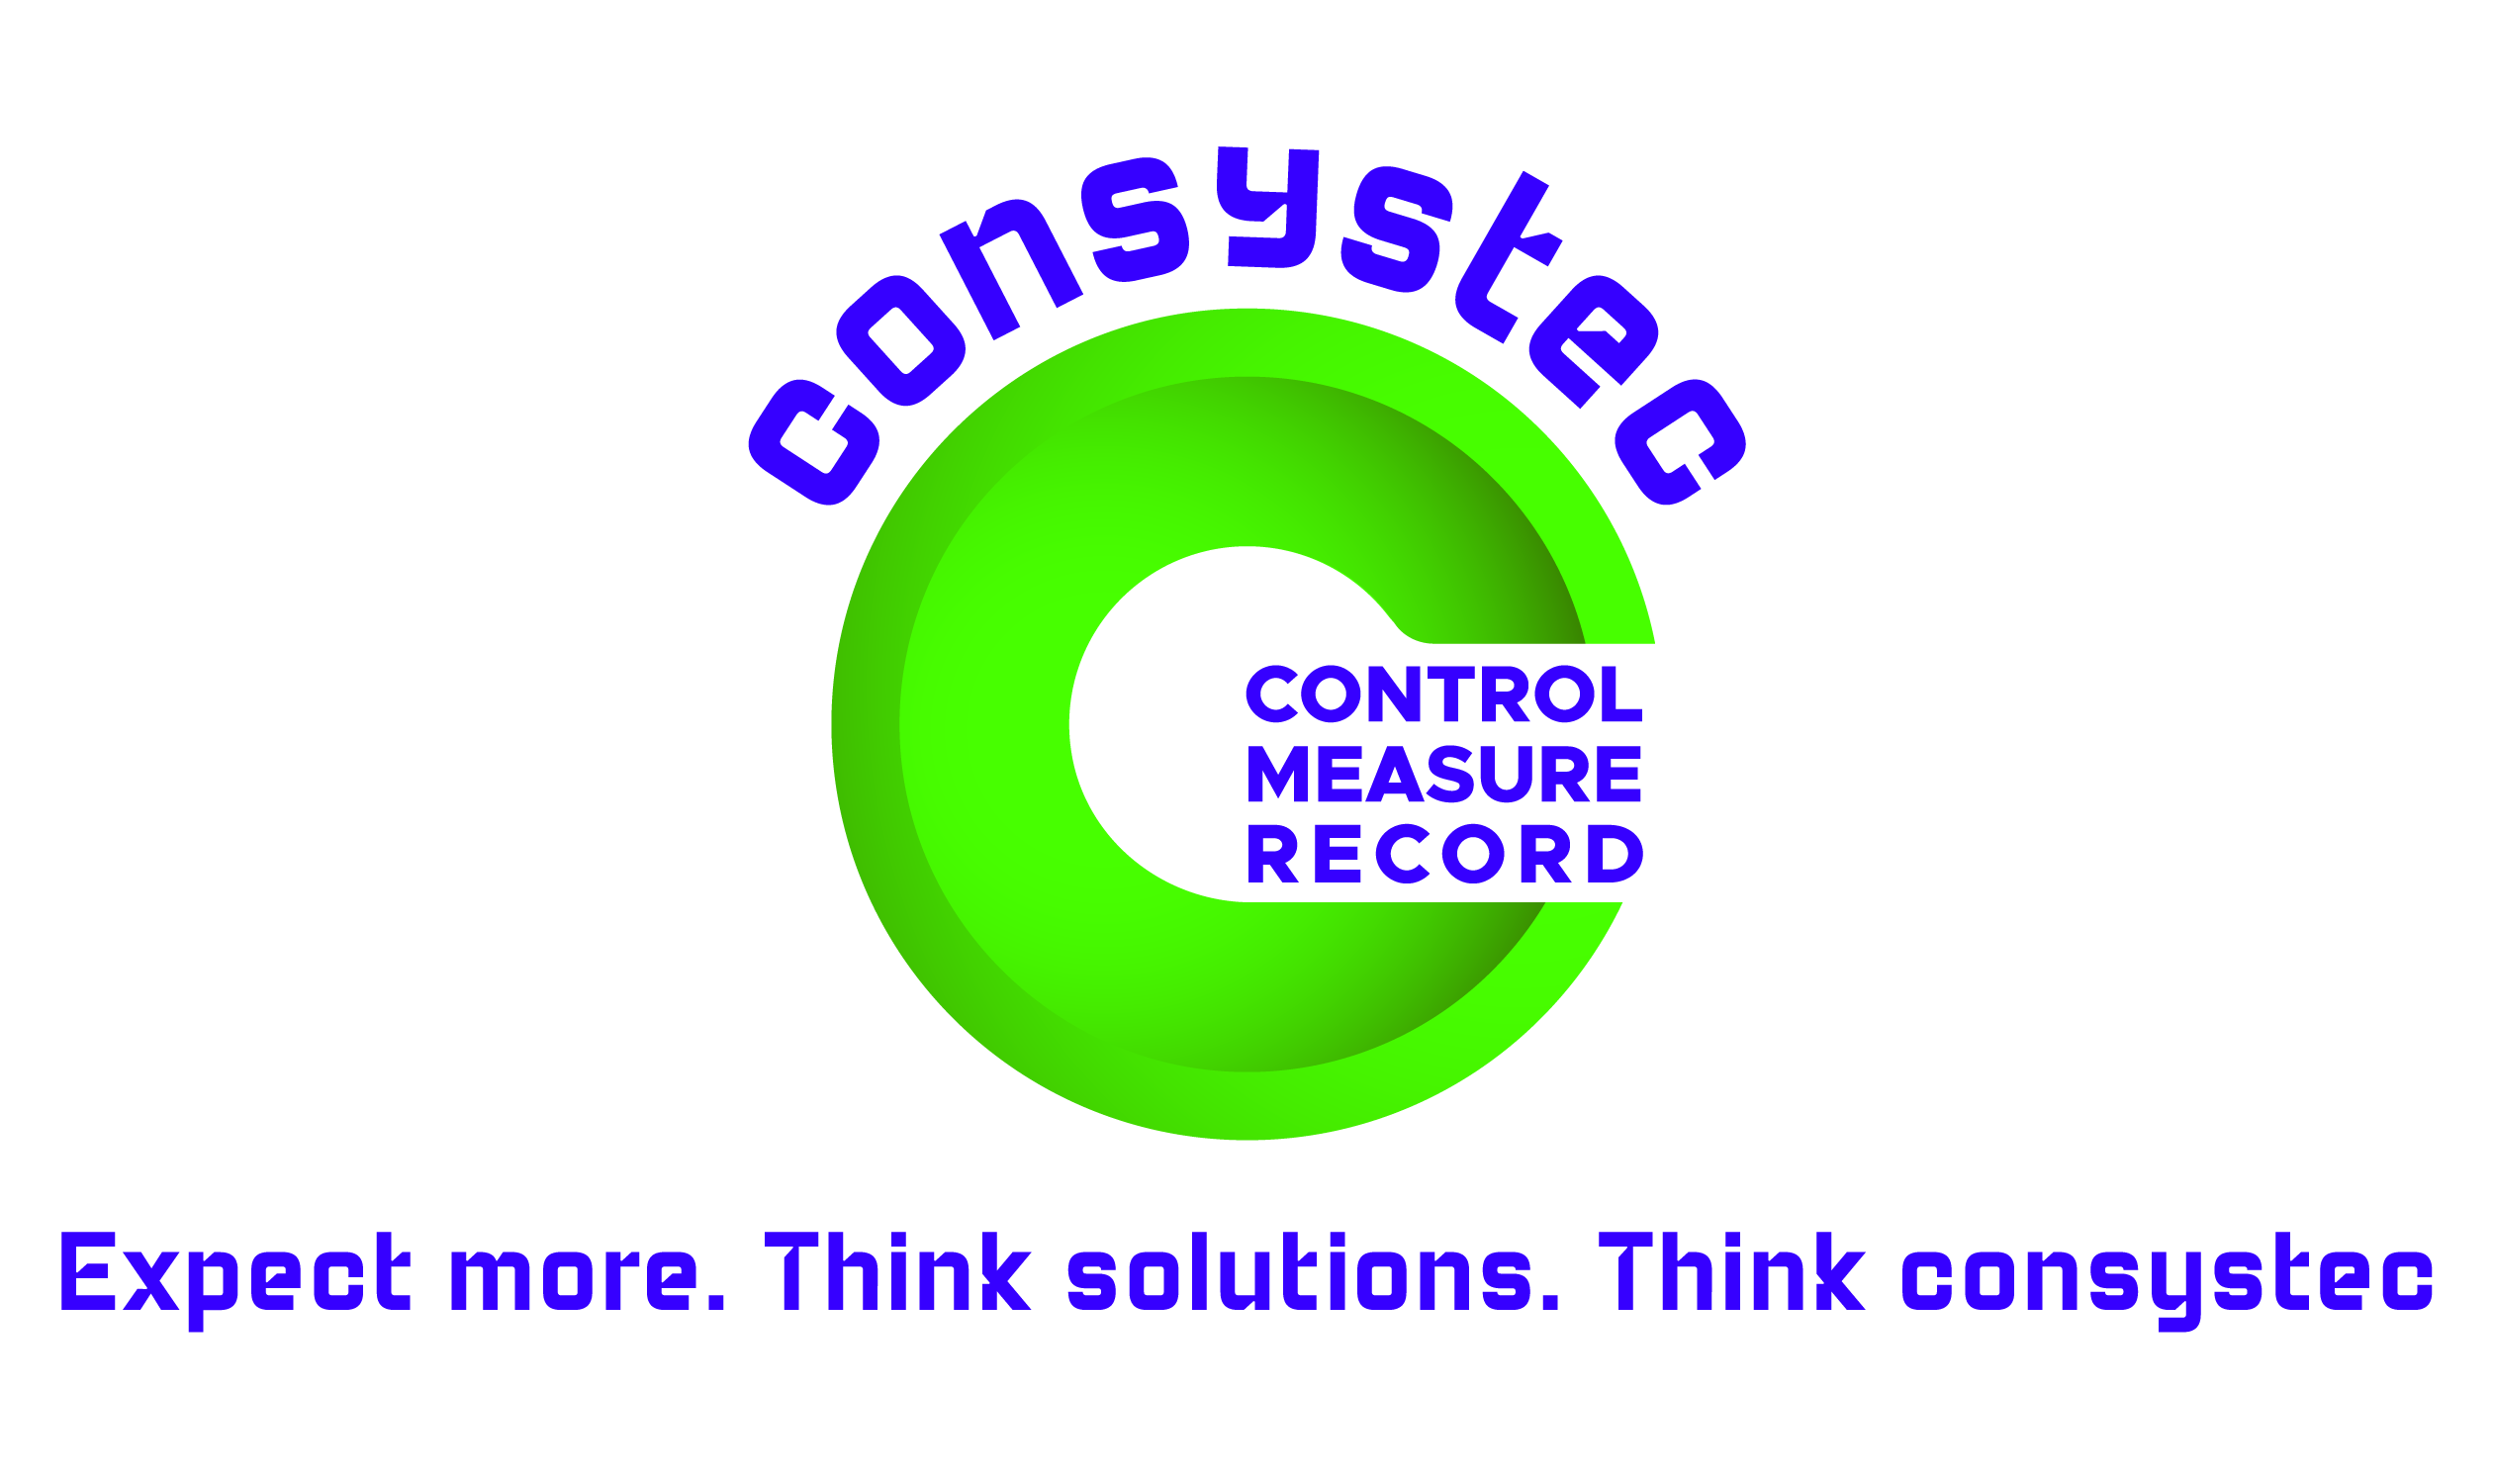 Consystec Products